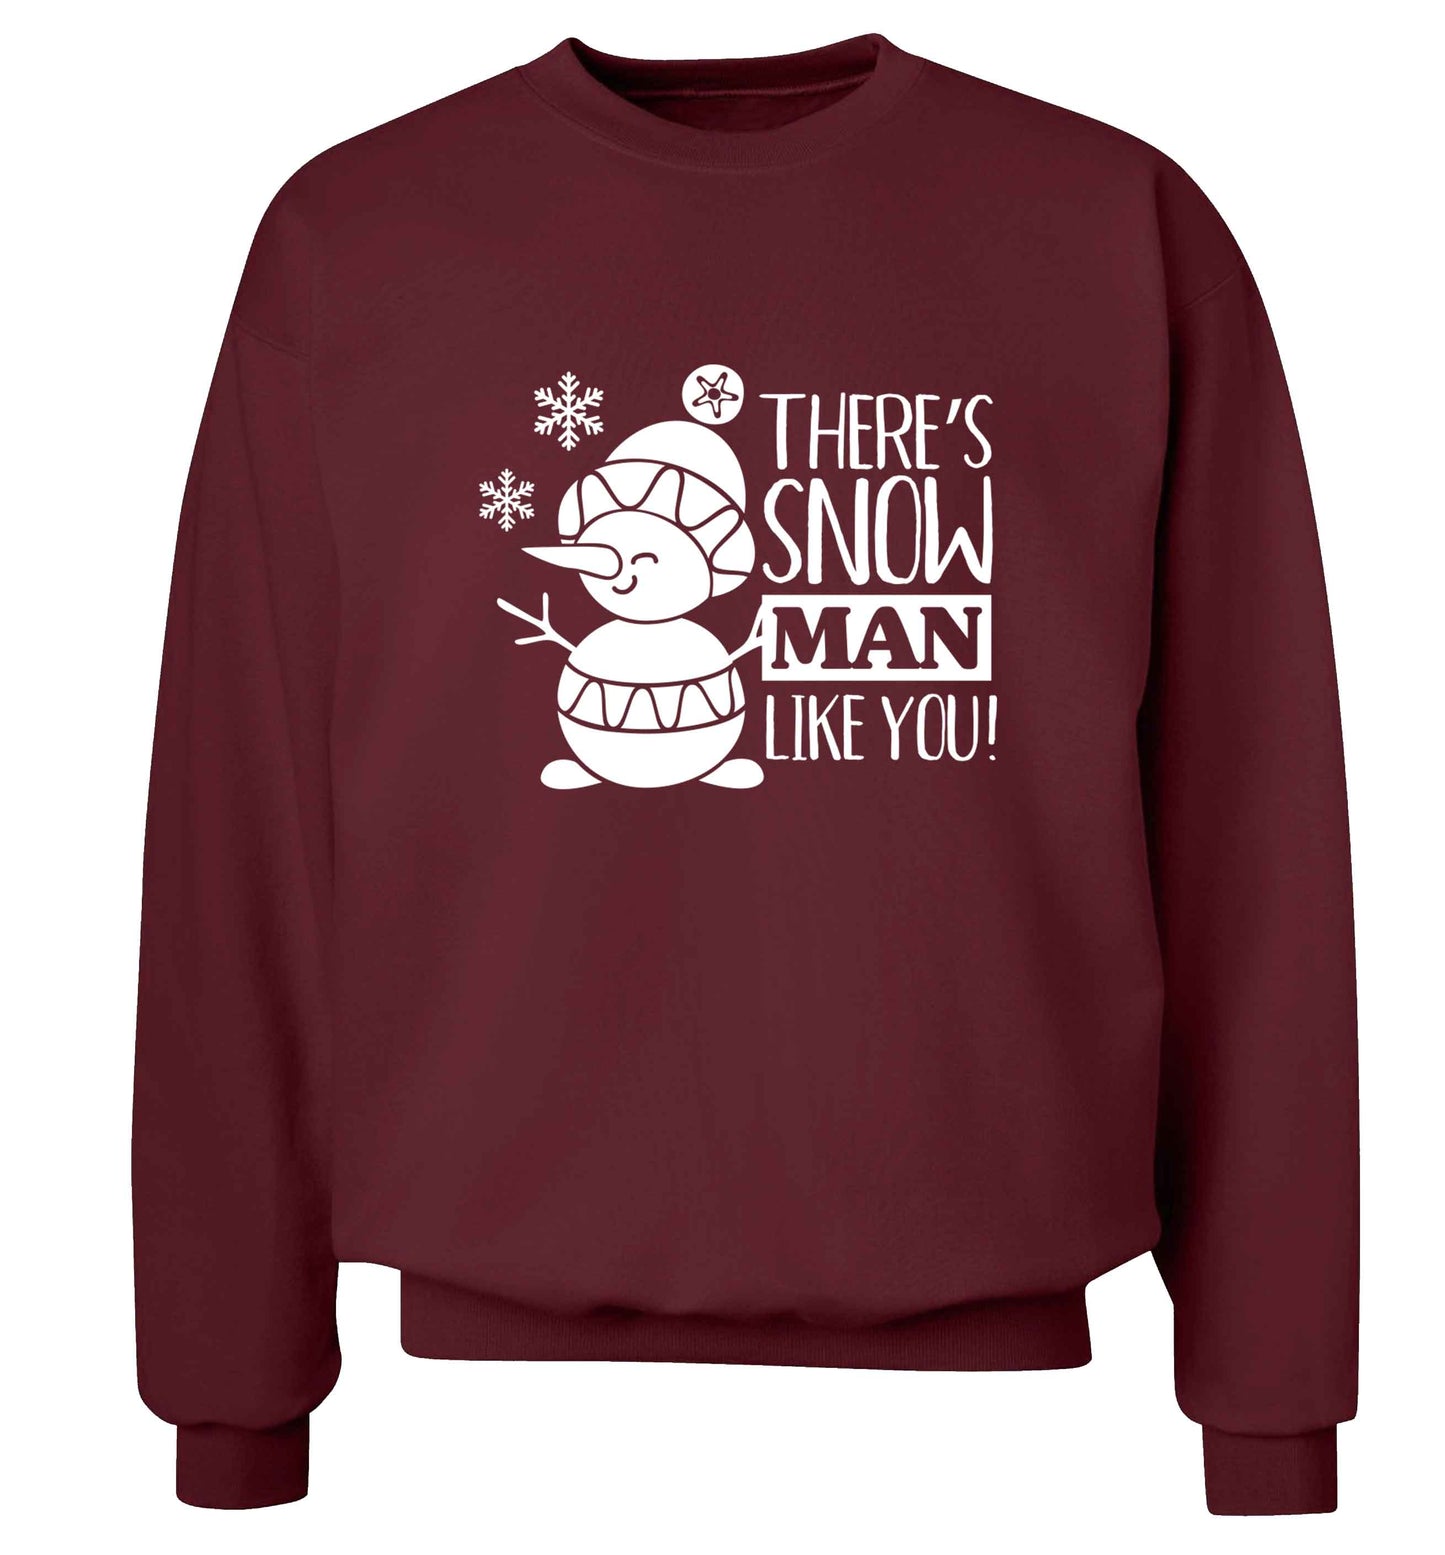 There's snow man like you adult's unisex maroon sweater 2XL